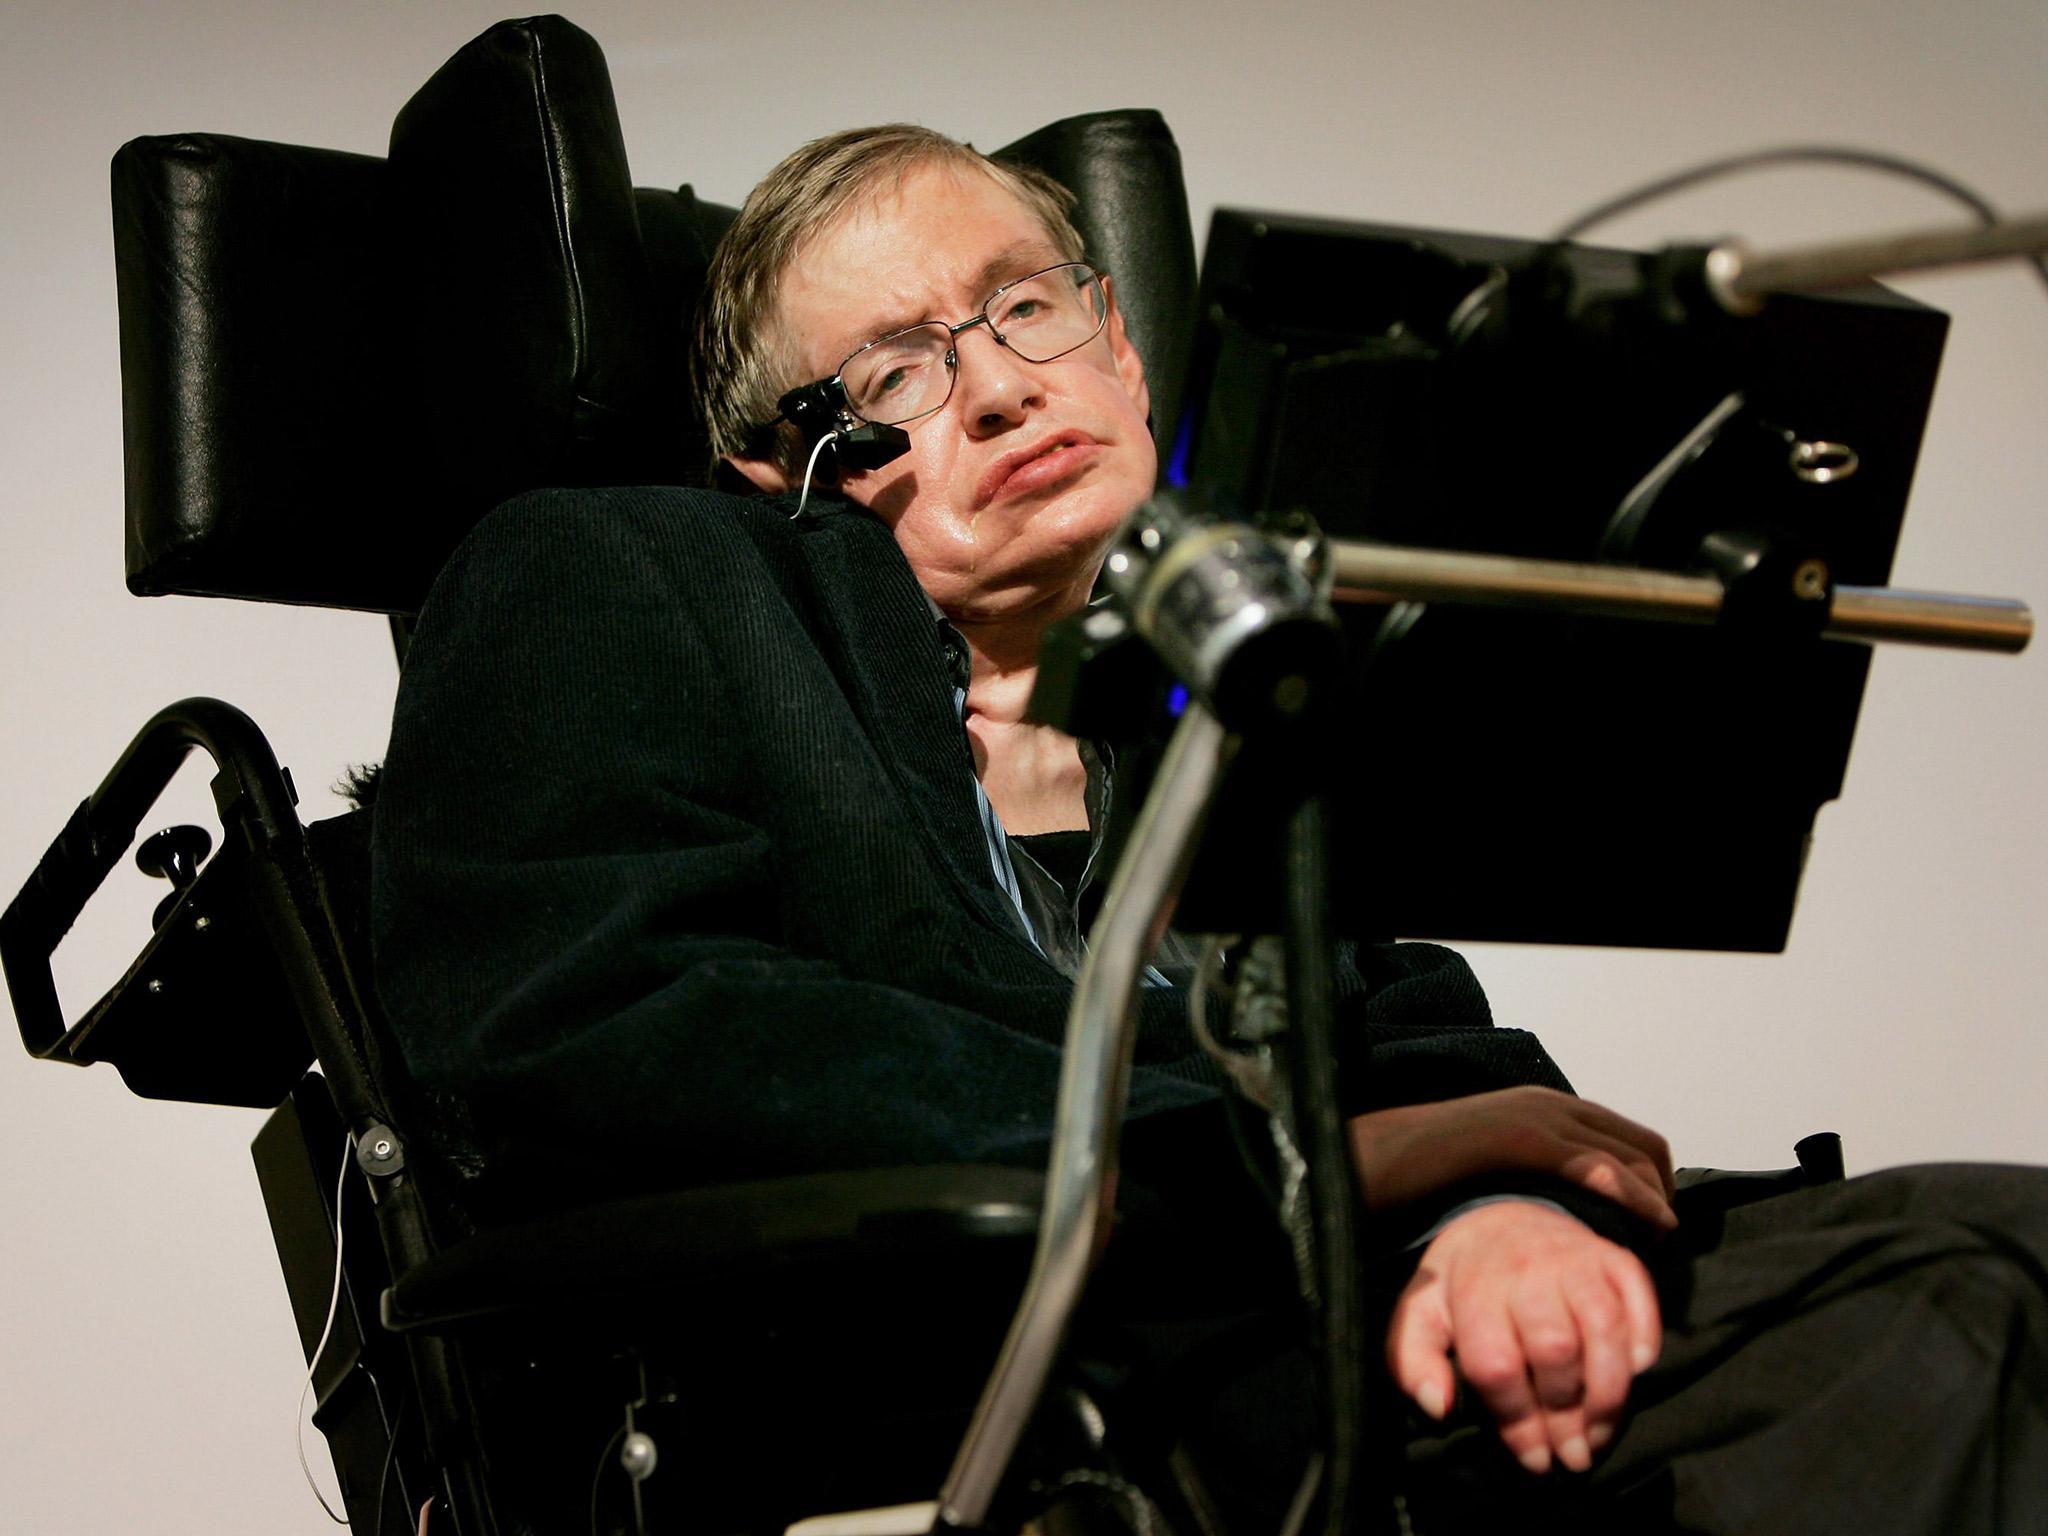 Professor Stephen Hawking is among the signatories in a letter written to The Times